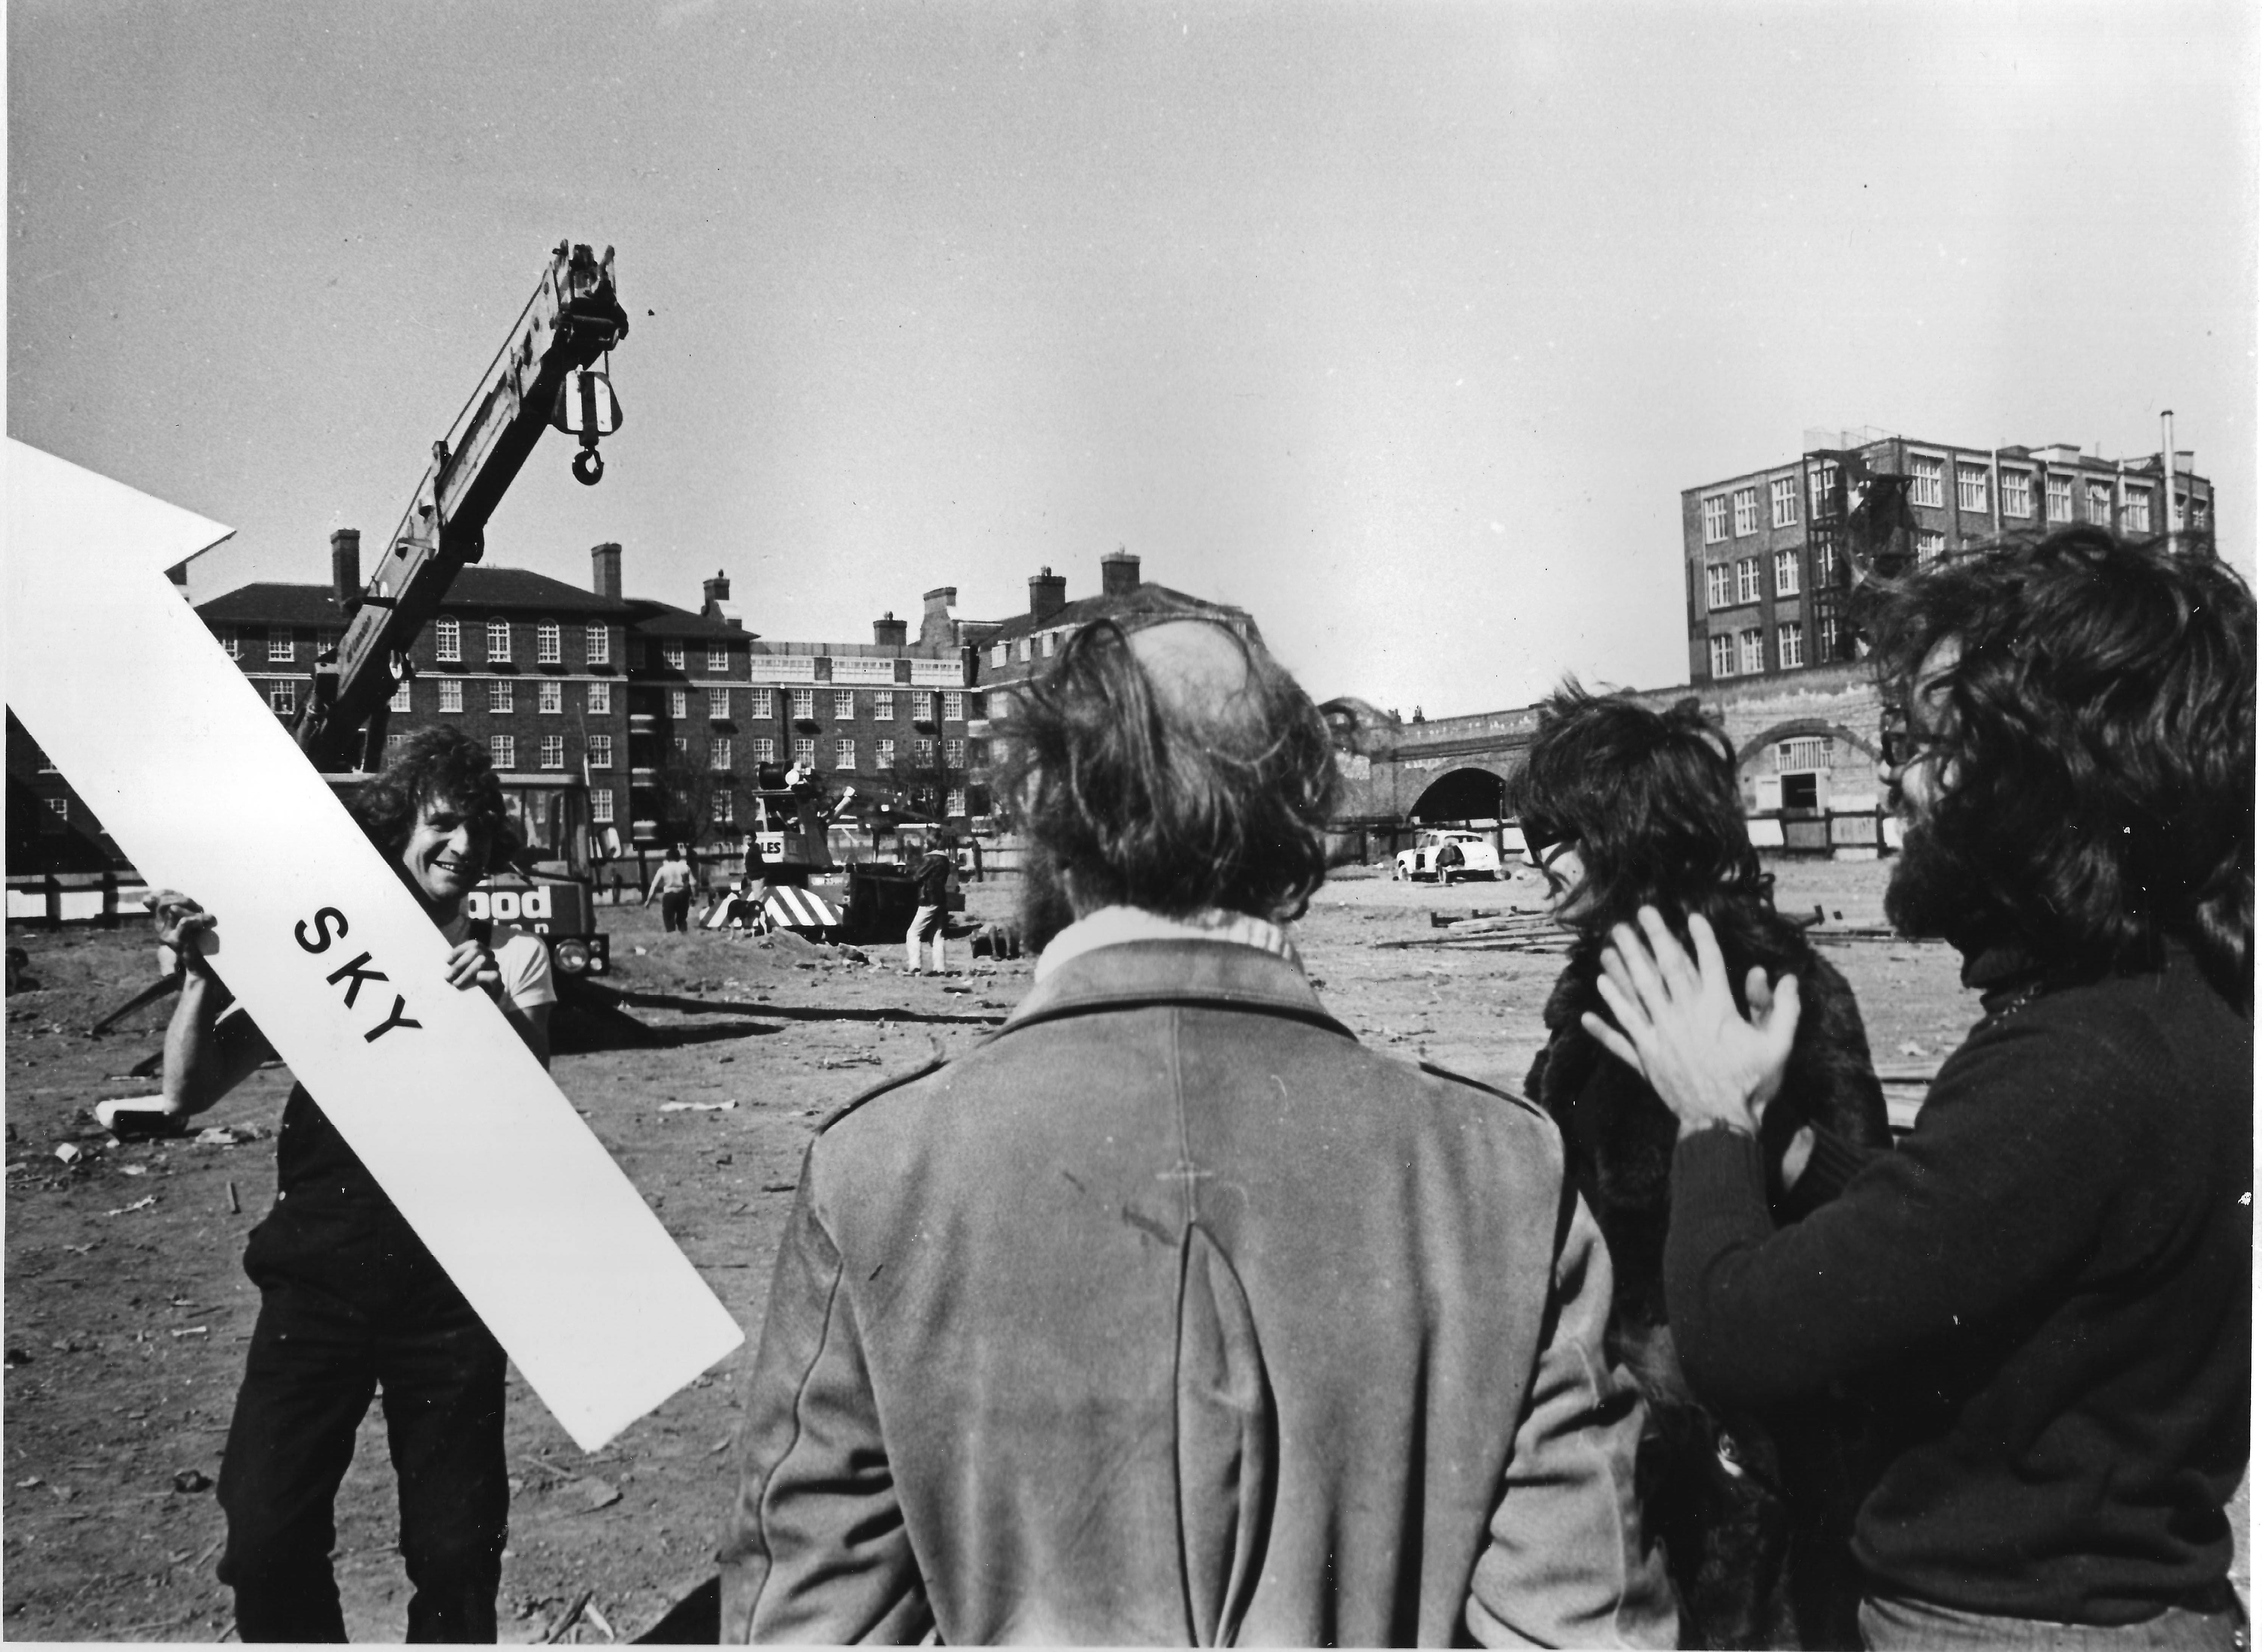 The image shows a black-and-white photograph taken during the performance or rehearsal of Crane Ballet. In the foreground, three figures stand with their backs to the camera, looking out at an unpaved construction site where two mobile cranes are visible. In the image’s left foreground, a young man holding a large white arrow with the word “SKY” written on it, and pointing upward, appears to be showing the sign to the three figures. The figure on the far right, the artist Leopoldo Maler, claps his hands while looking at the man holding the sign.